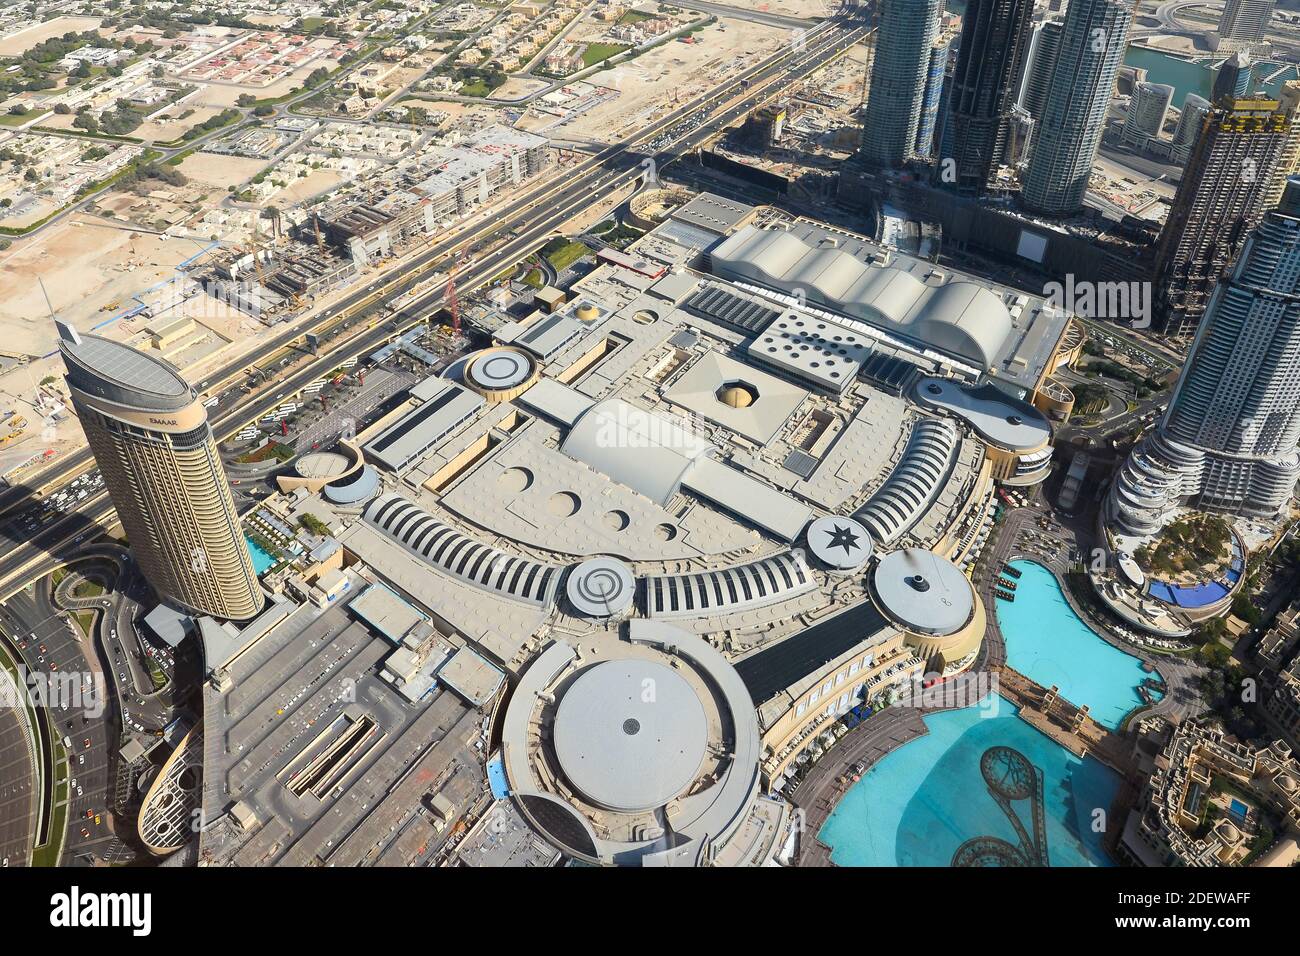 The Dubai Mall, the largest shopping mall in the world, located in Dubai, United Arab Emirates. Aerial exterior view of Emaar Property. Stock Photo